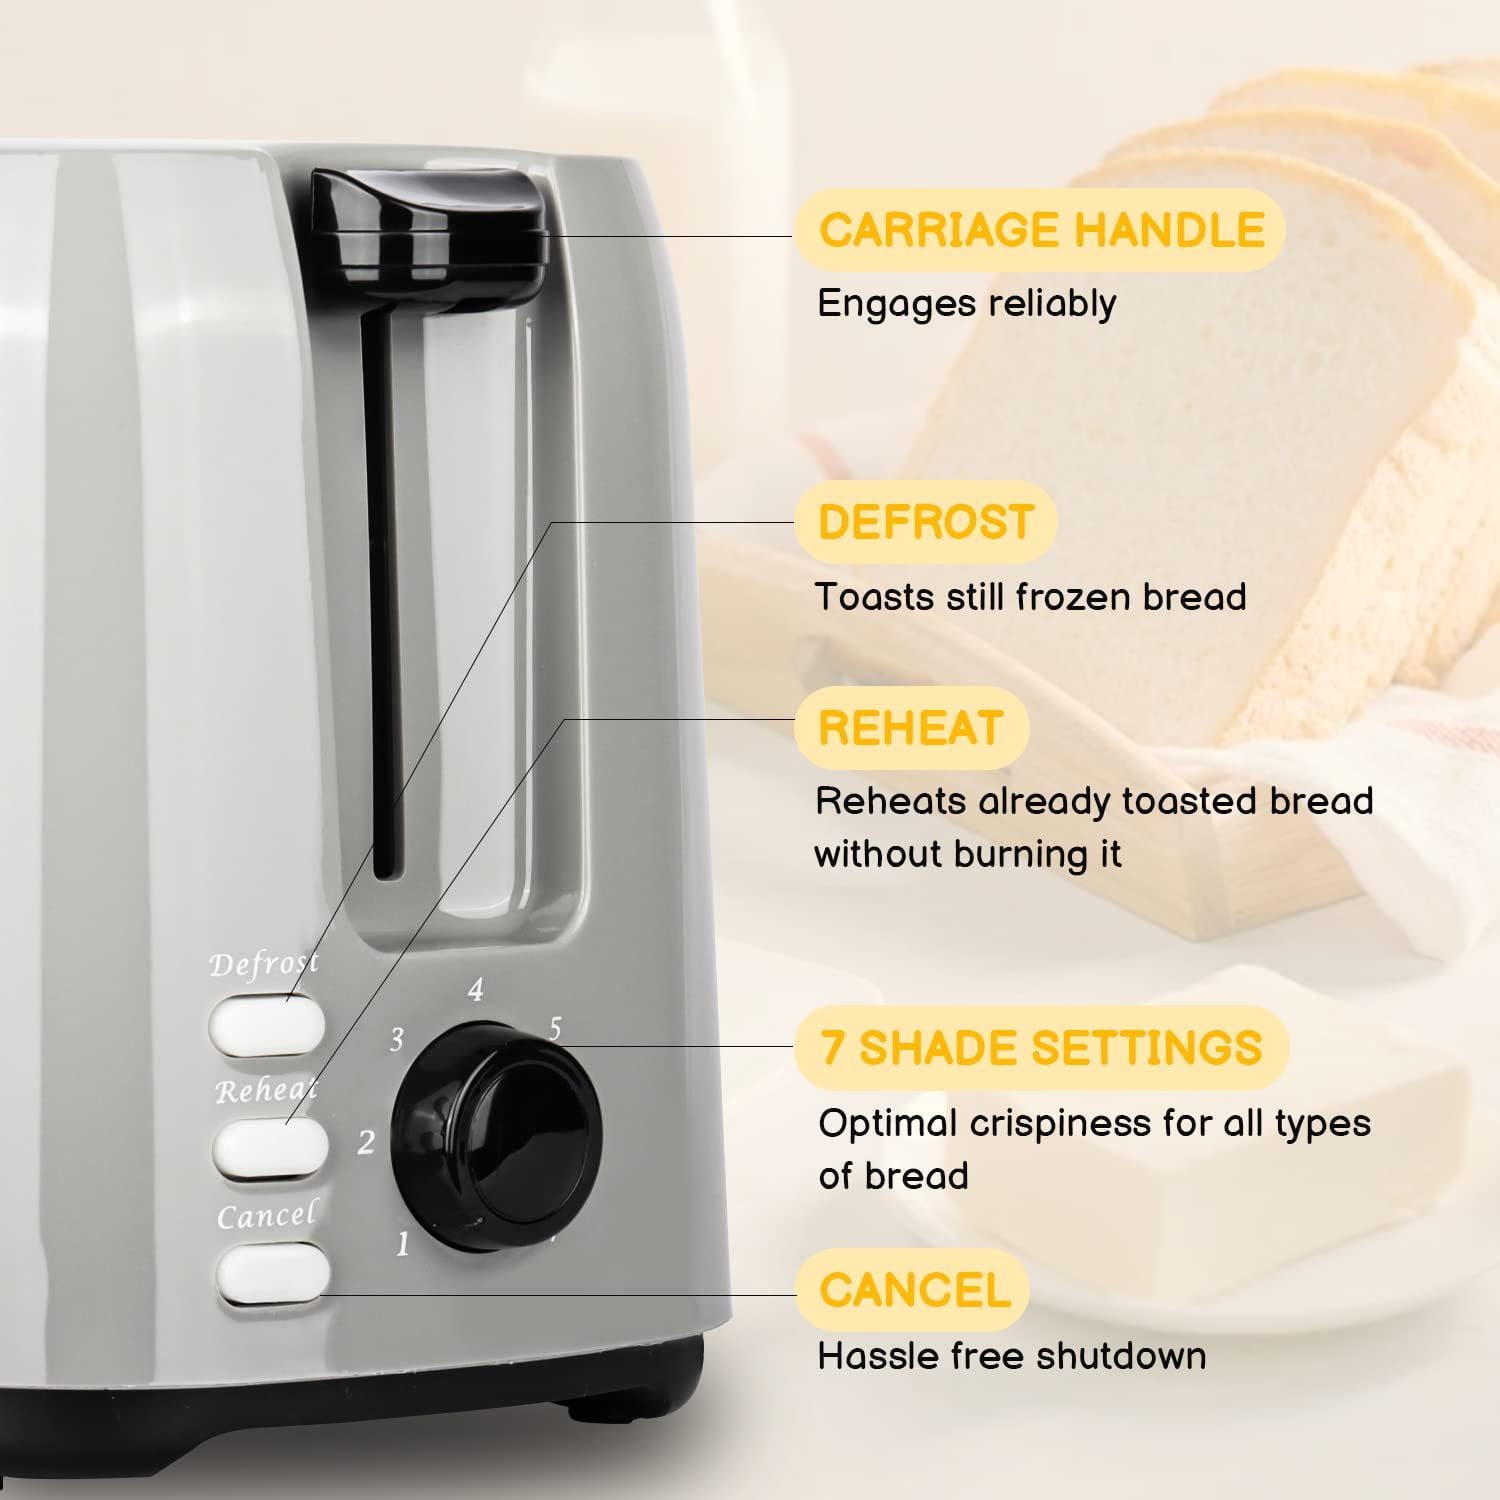 US Sold Only iSiLER 2 Slice Toaster, 1.3 Inches Wide Slot Toaster with 7  Shade Settings and Double Side Baking, Compact Bread Toaster with Removable  Crumb Tray, UL Certified, Defrost Reheat Cancel Function – iSiLER